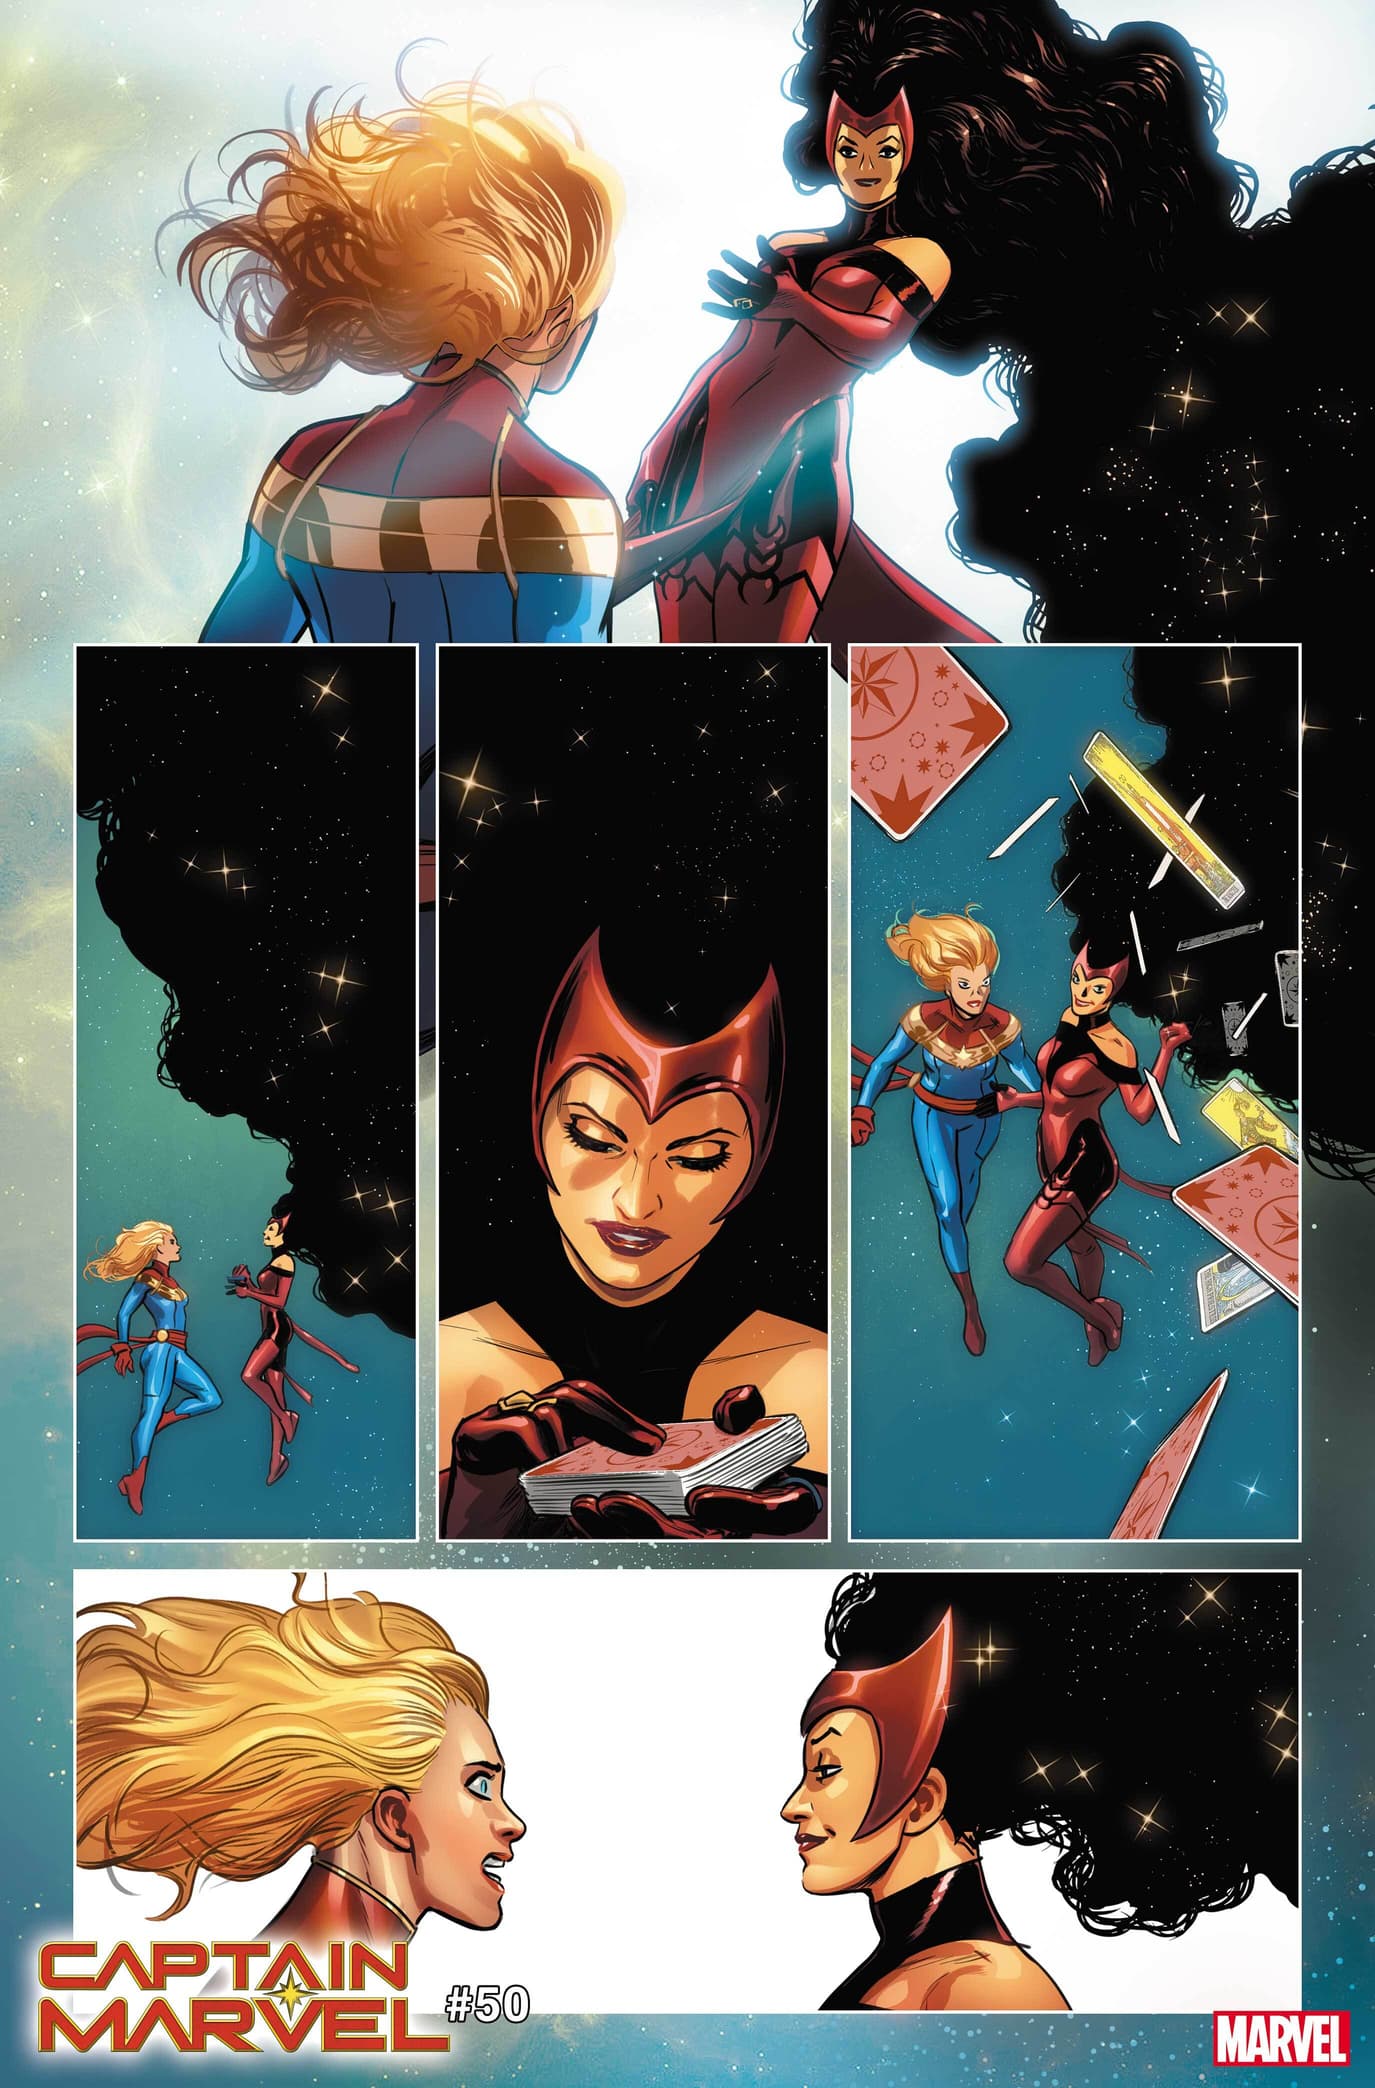 CAPTAIN MARVEL (2019) #50 page by Kelly Thompson and David Lopez